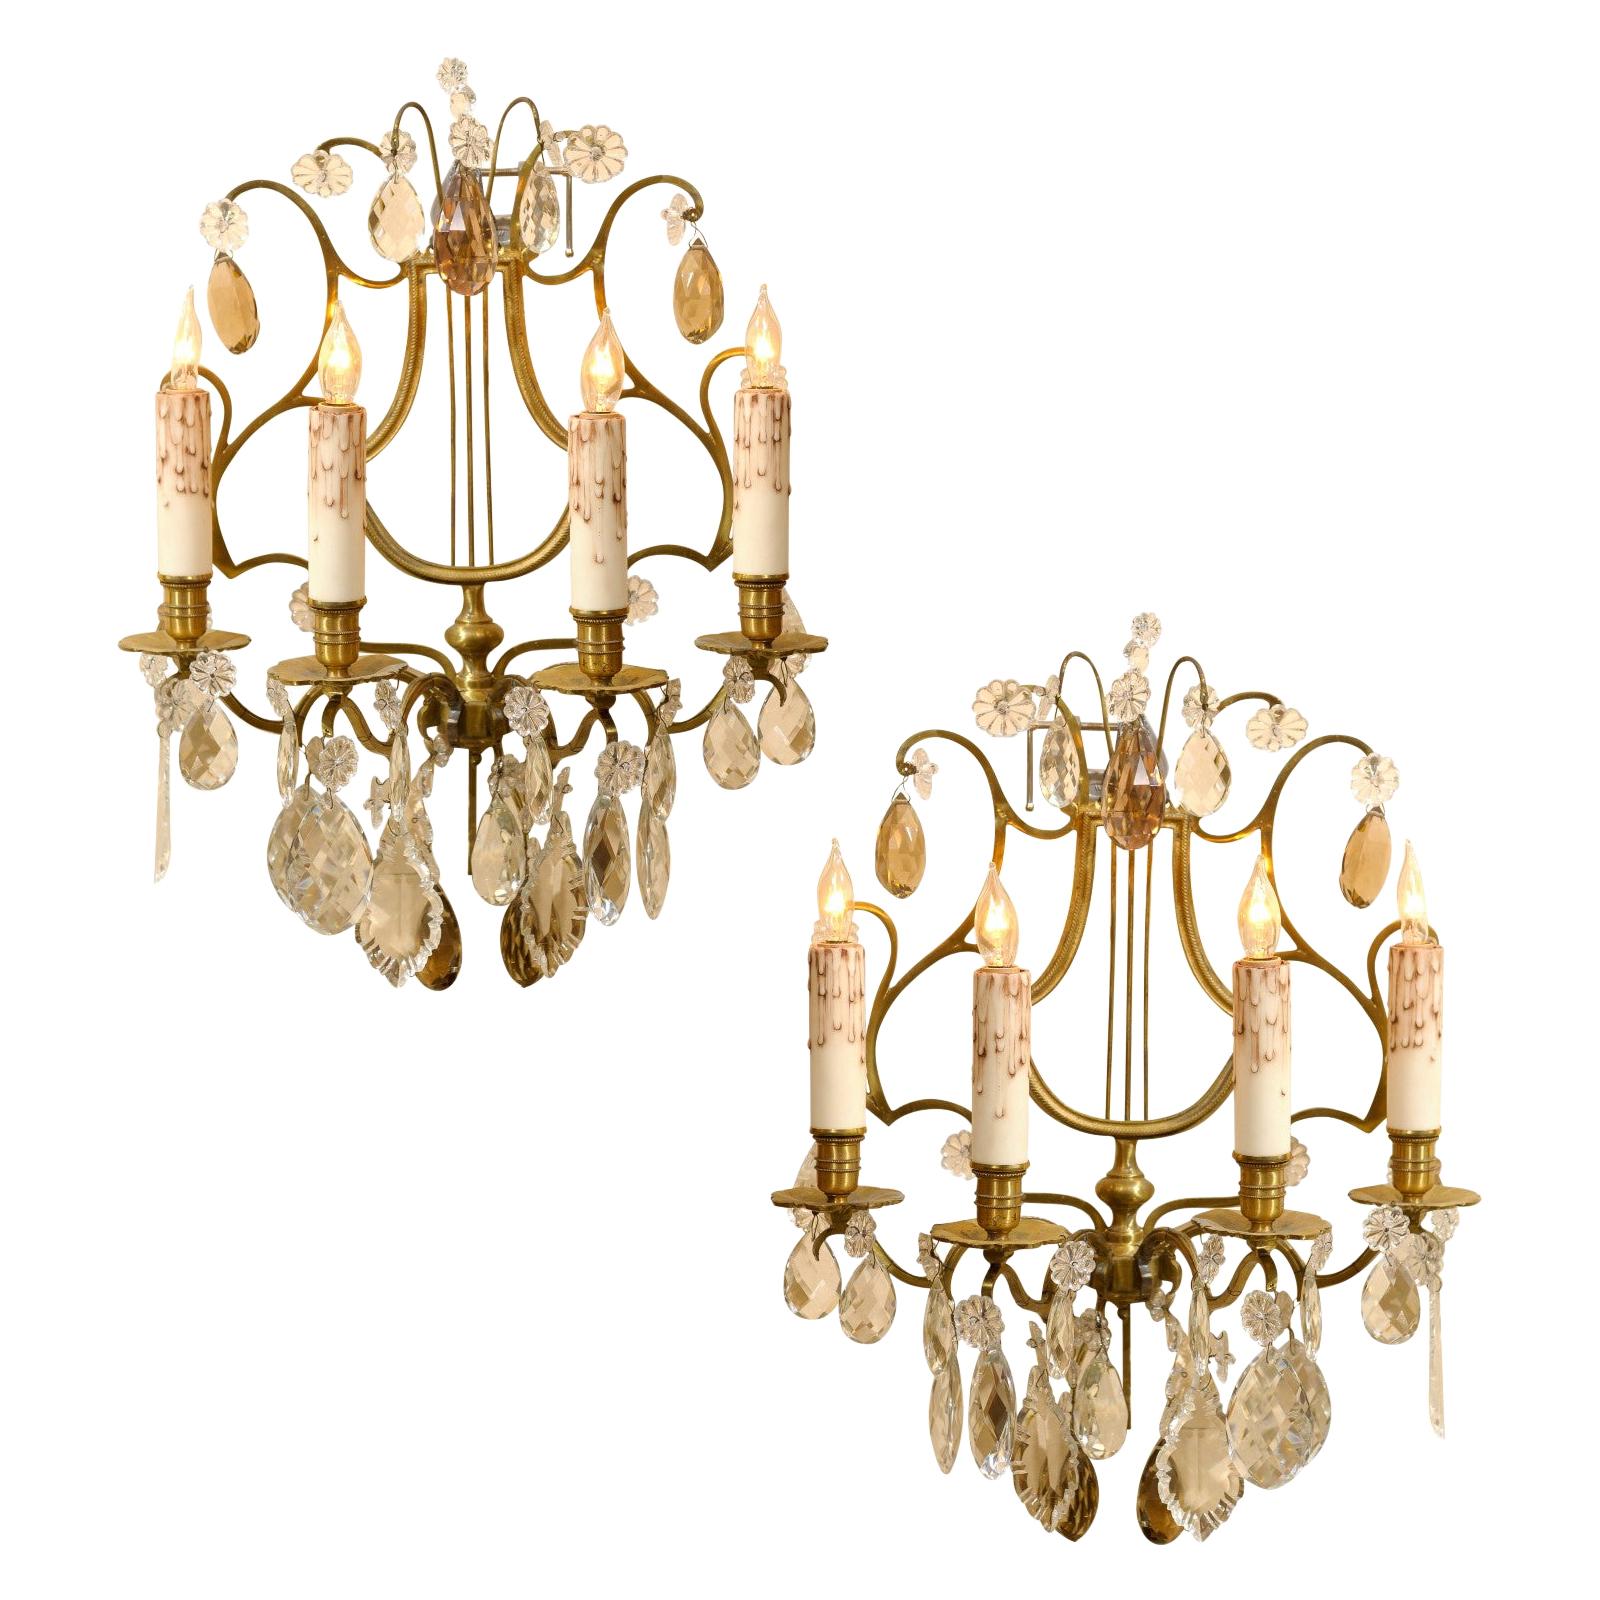 Pair of French 4-Light Lyre Brass Sconces with Amber Crystals, 19th Century For Sale